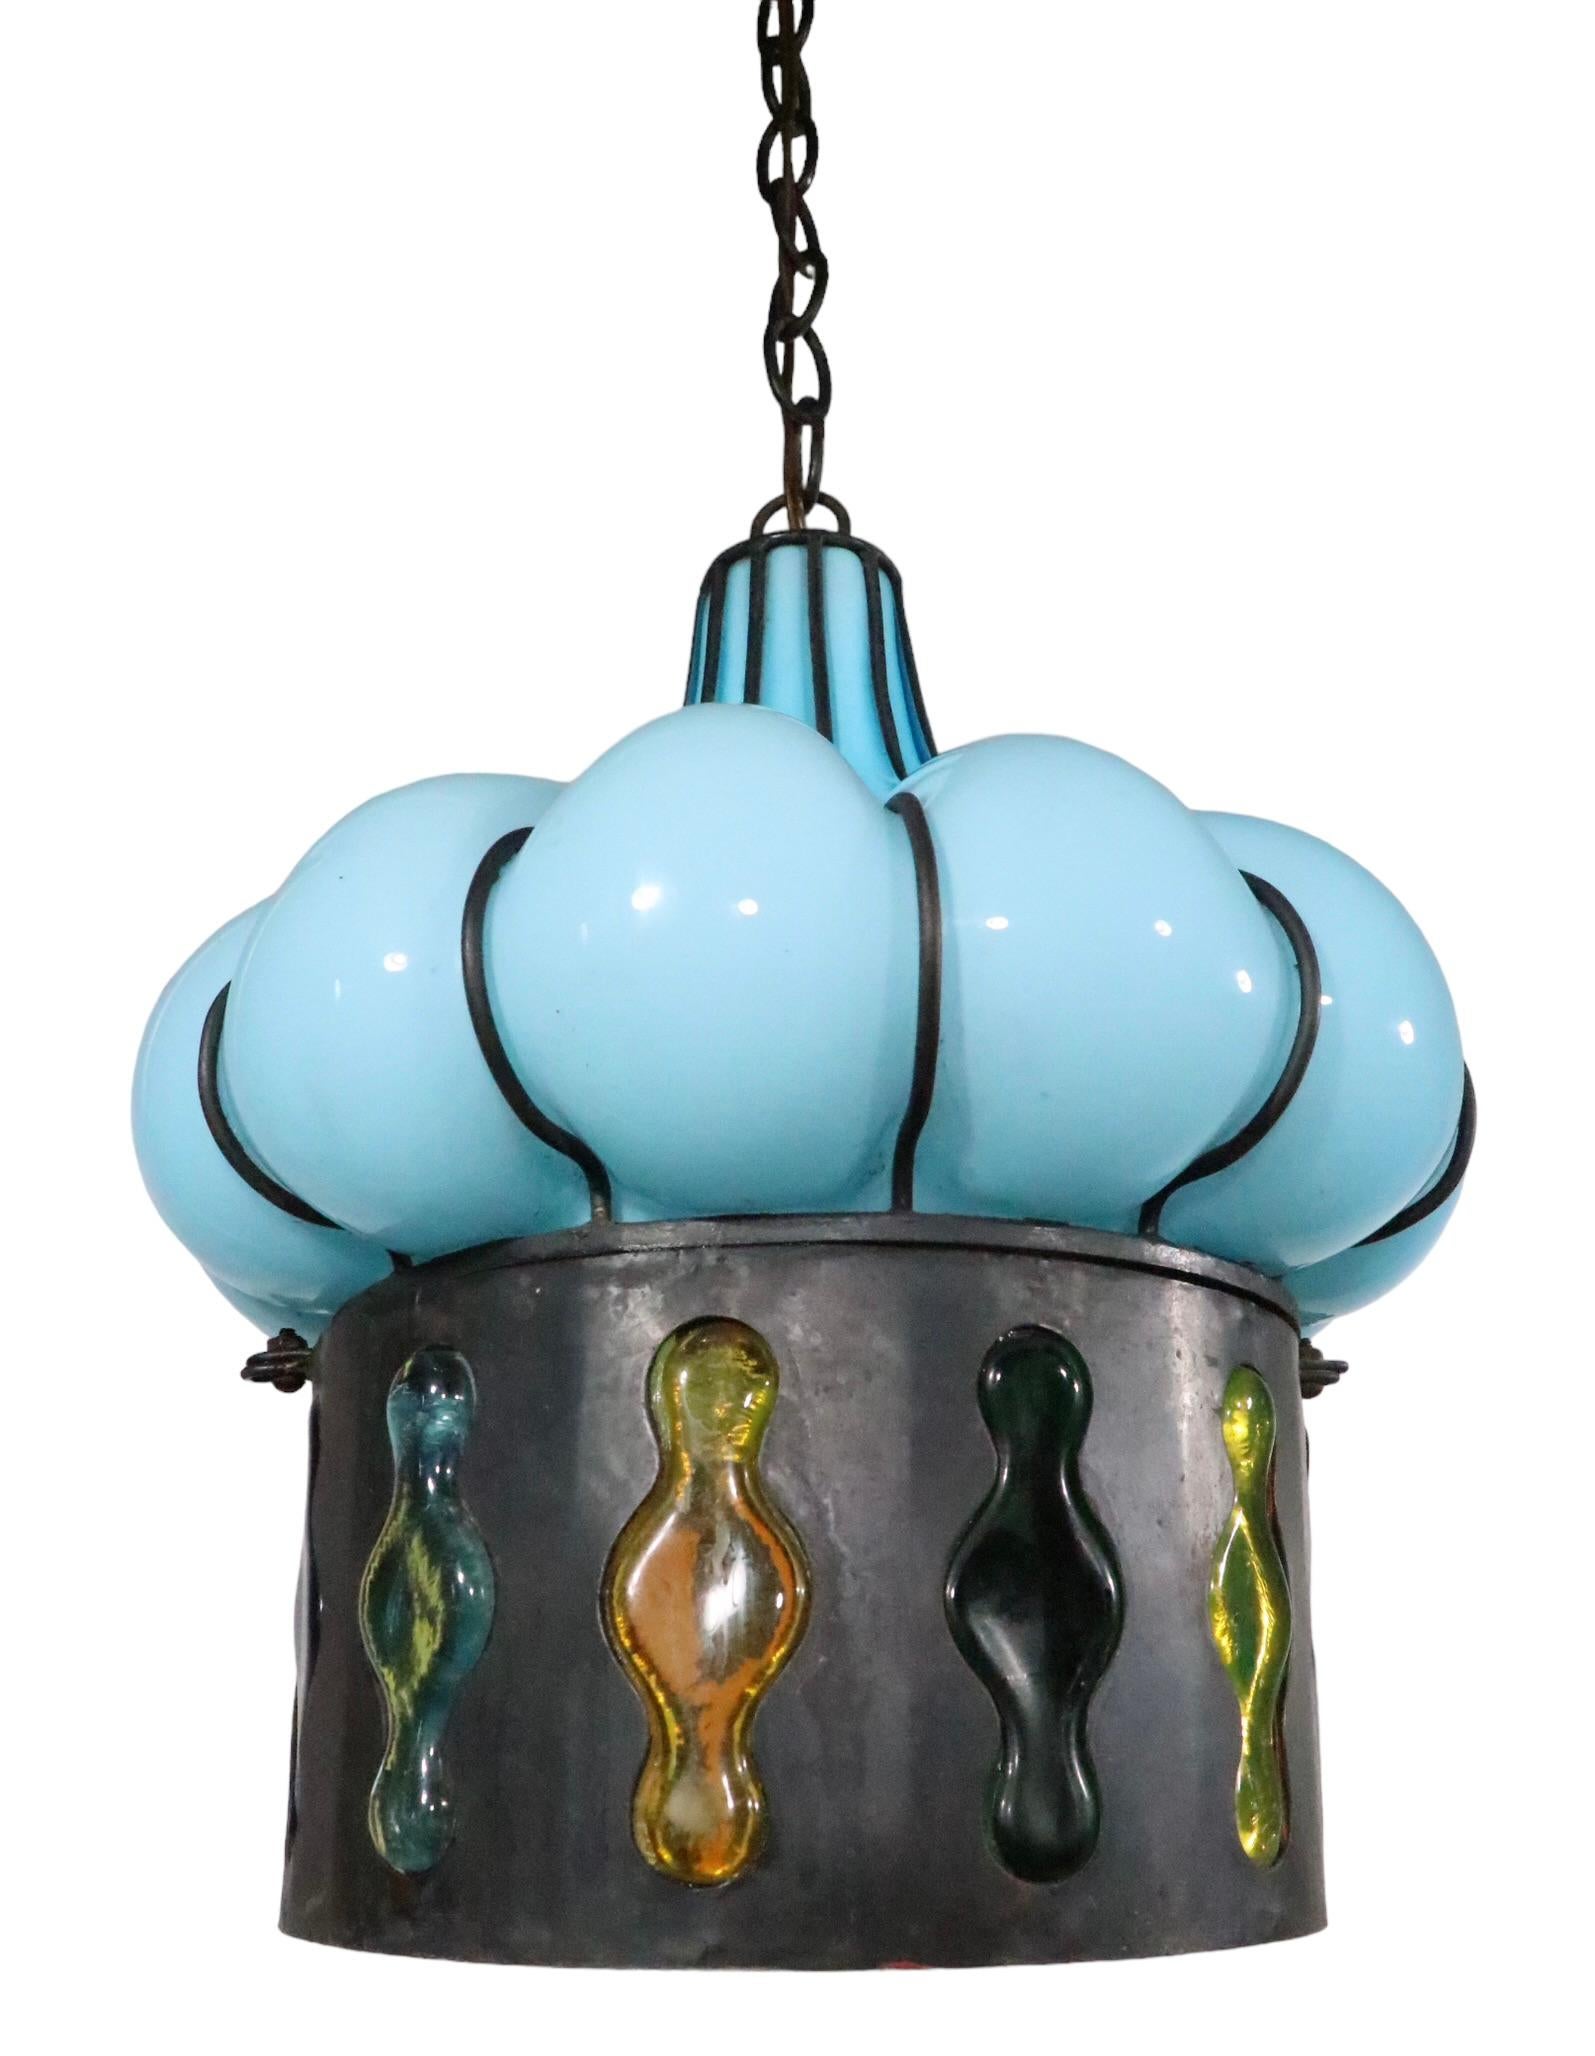 Probably the best blown glass and metal pendant light we have had the pleasure of offering, this fixture features a baby blue upper section, with a mosaic like lower section, which has multi colored glass panels. The chandelier is in excellent